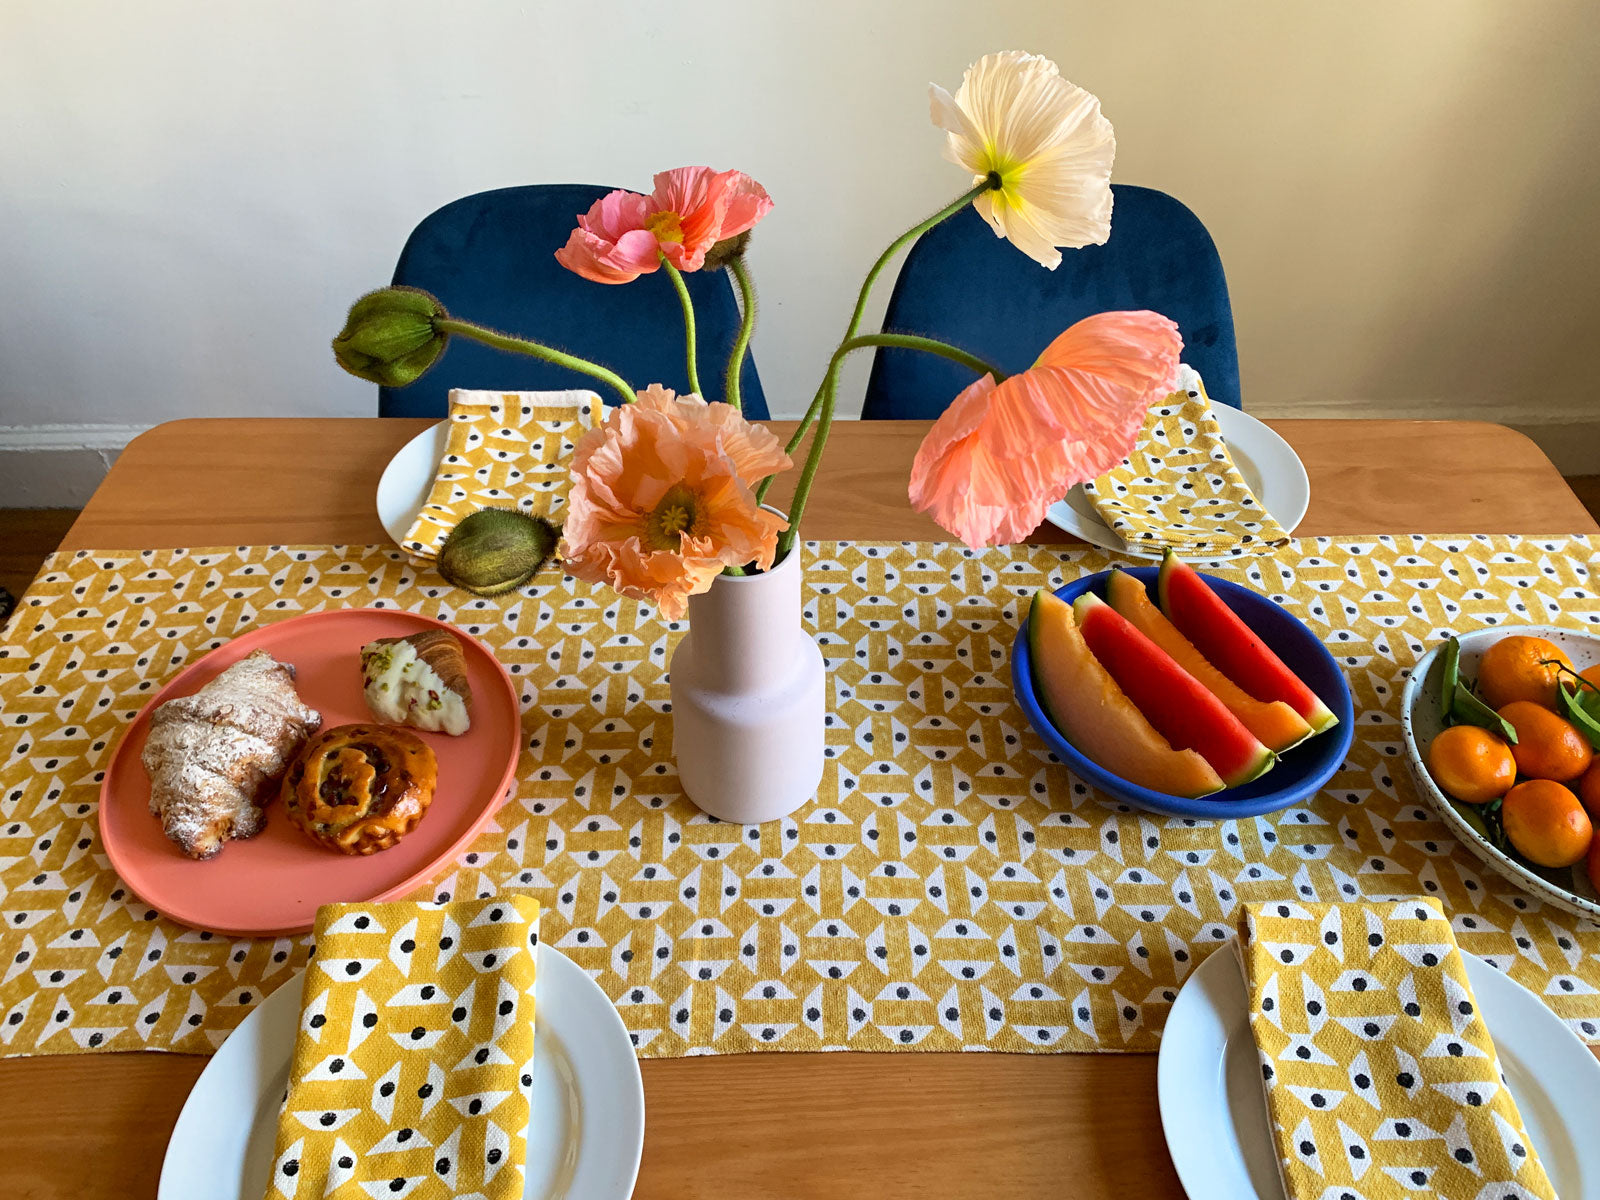 Yellow and black geometric patterned table runner and napkins by SUNDAY/MONDAY.  Hand block printed in India. Perfect table linens for spring and summer in a cheery chic yellow.